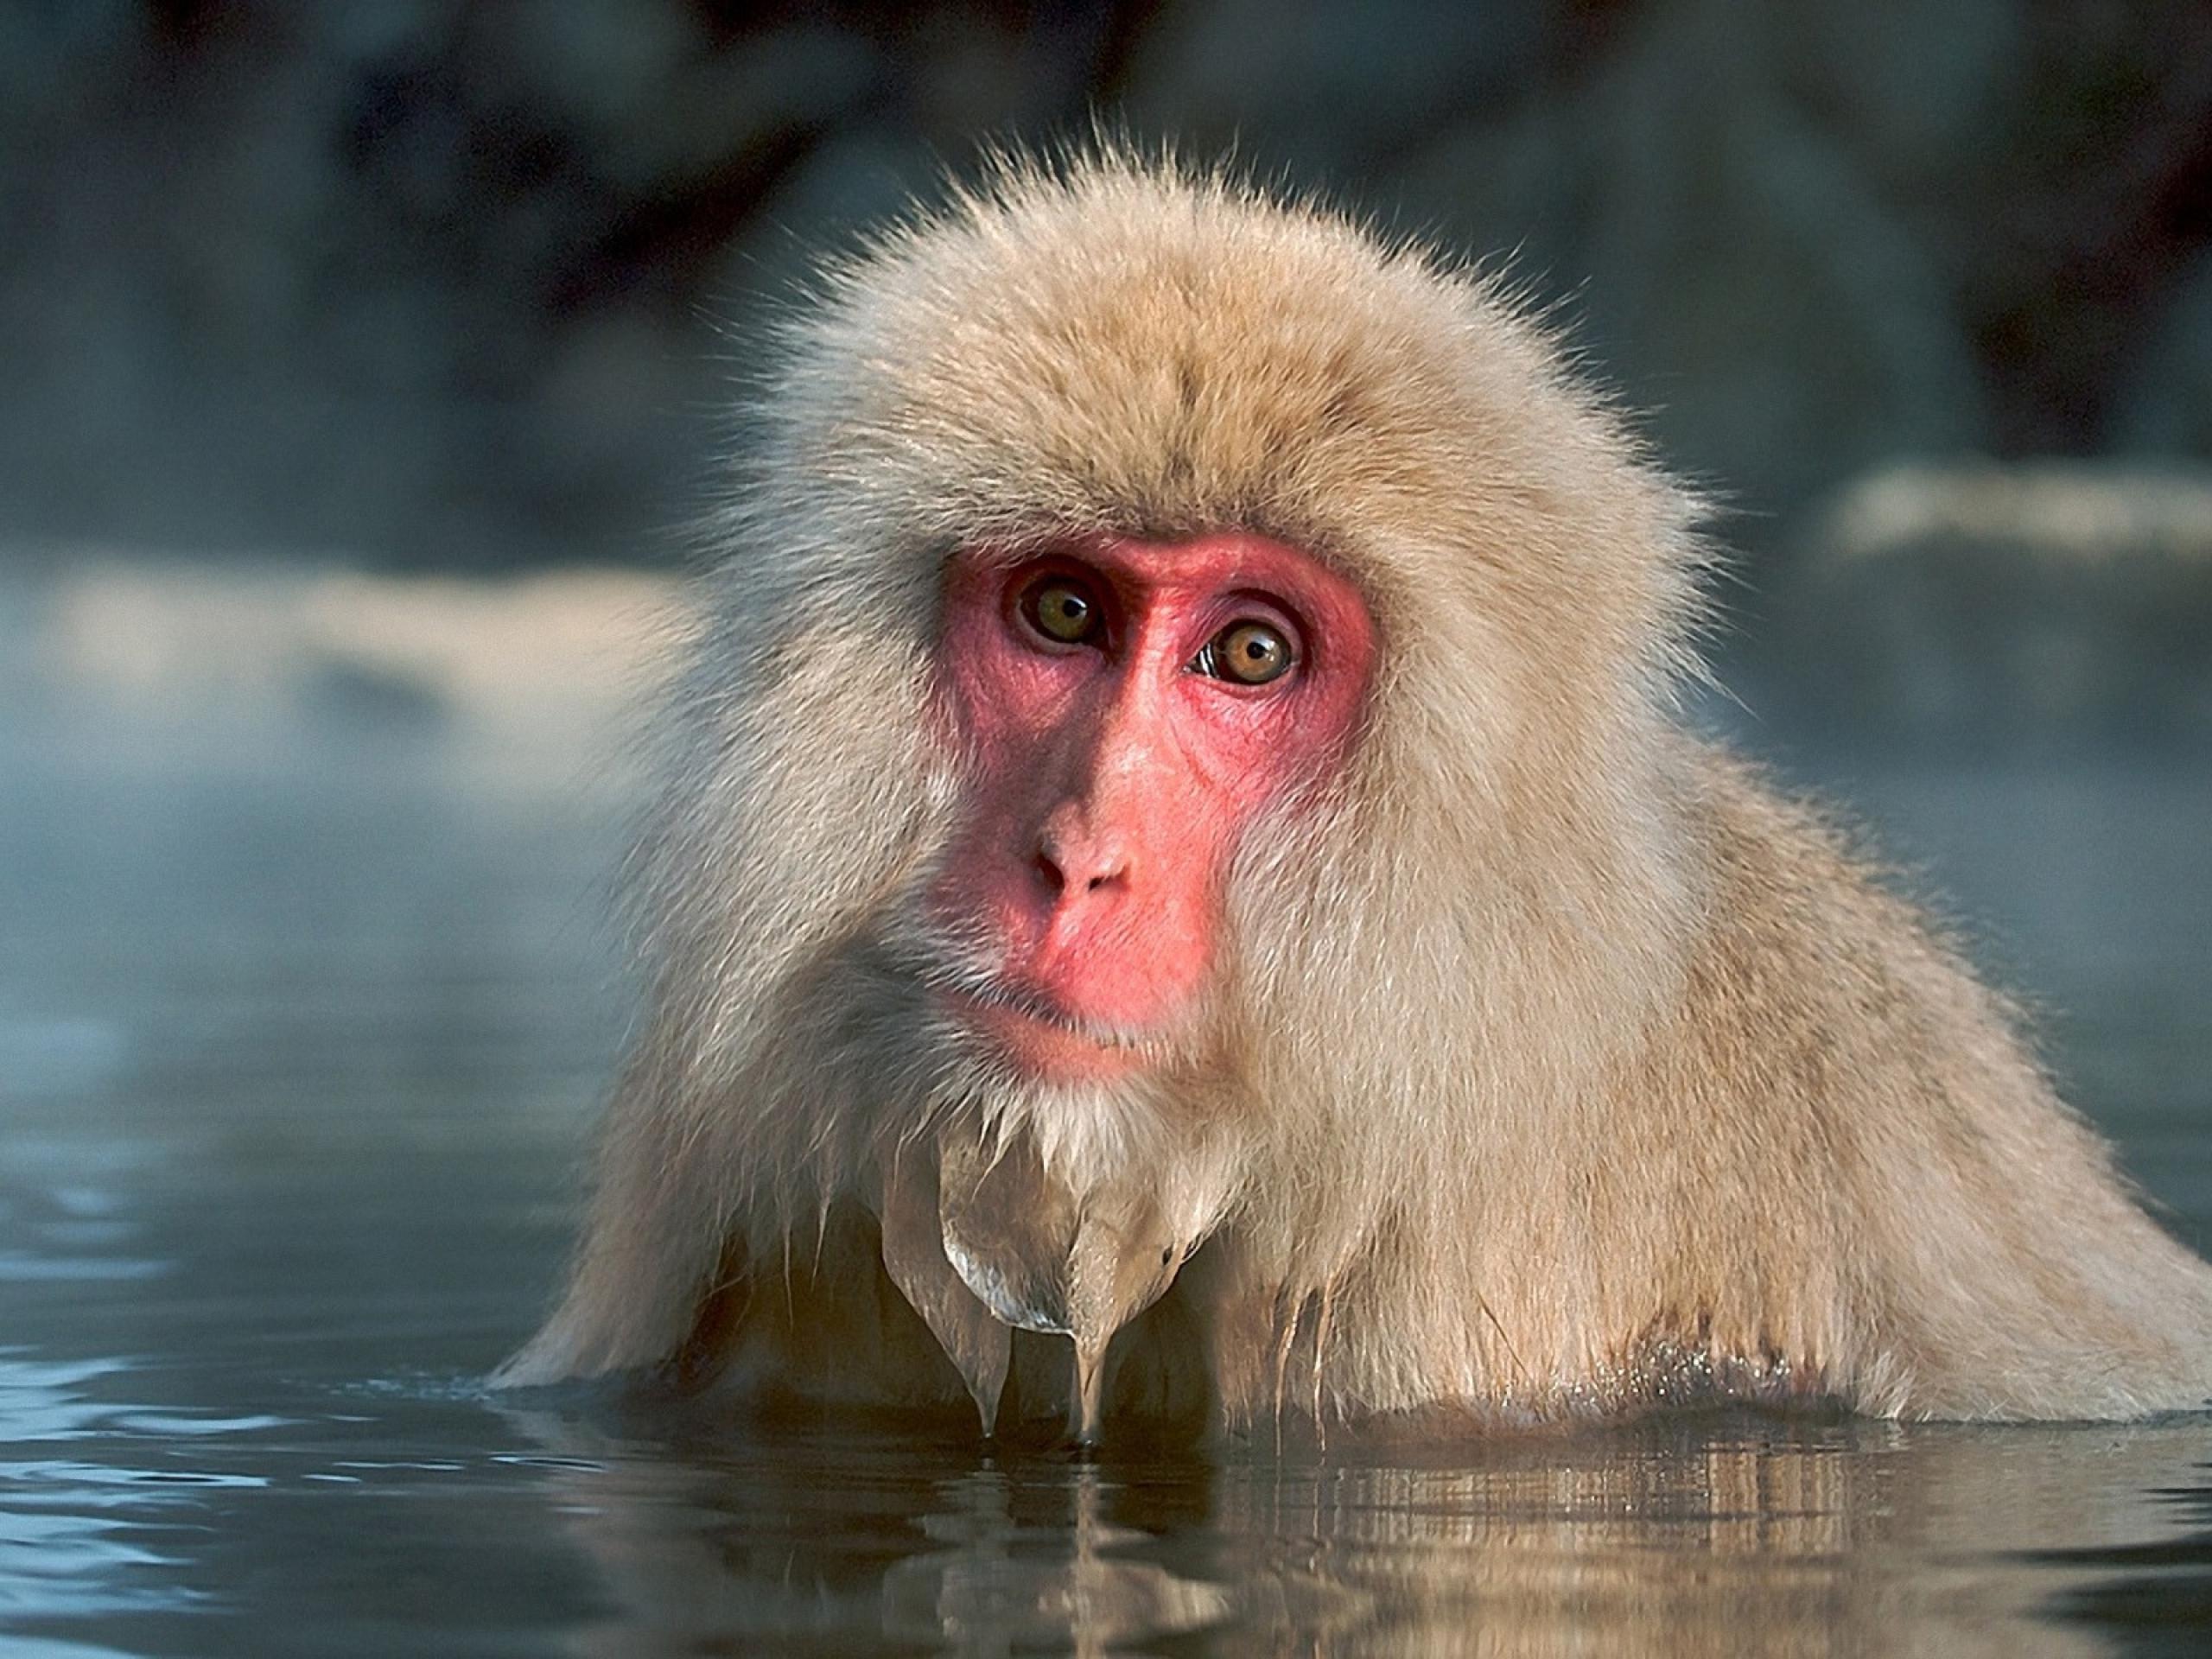 Thu Apr Japanese Macaque Animals Image Galleries